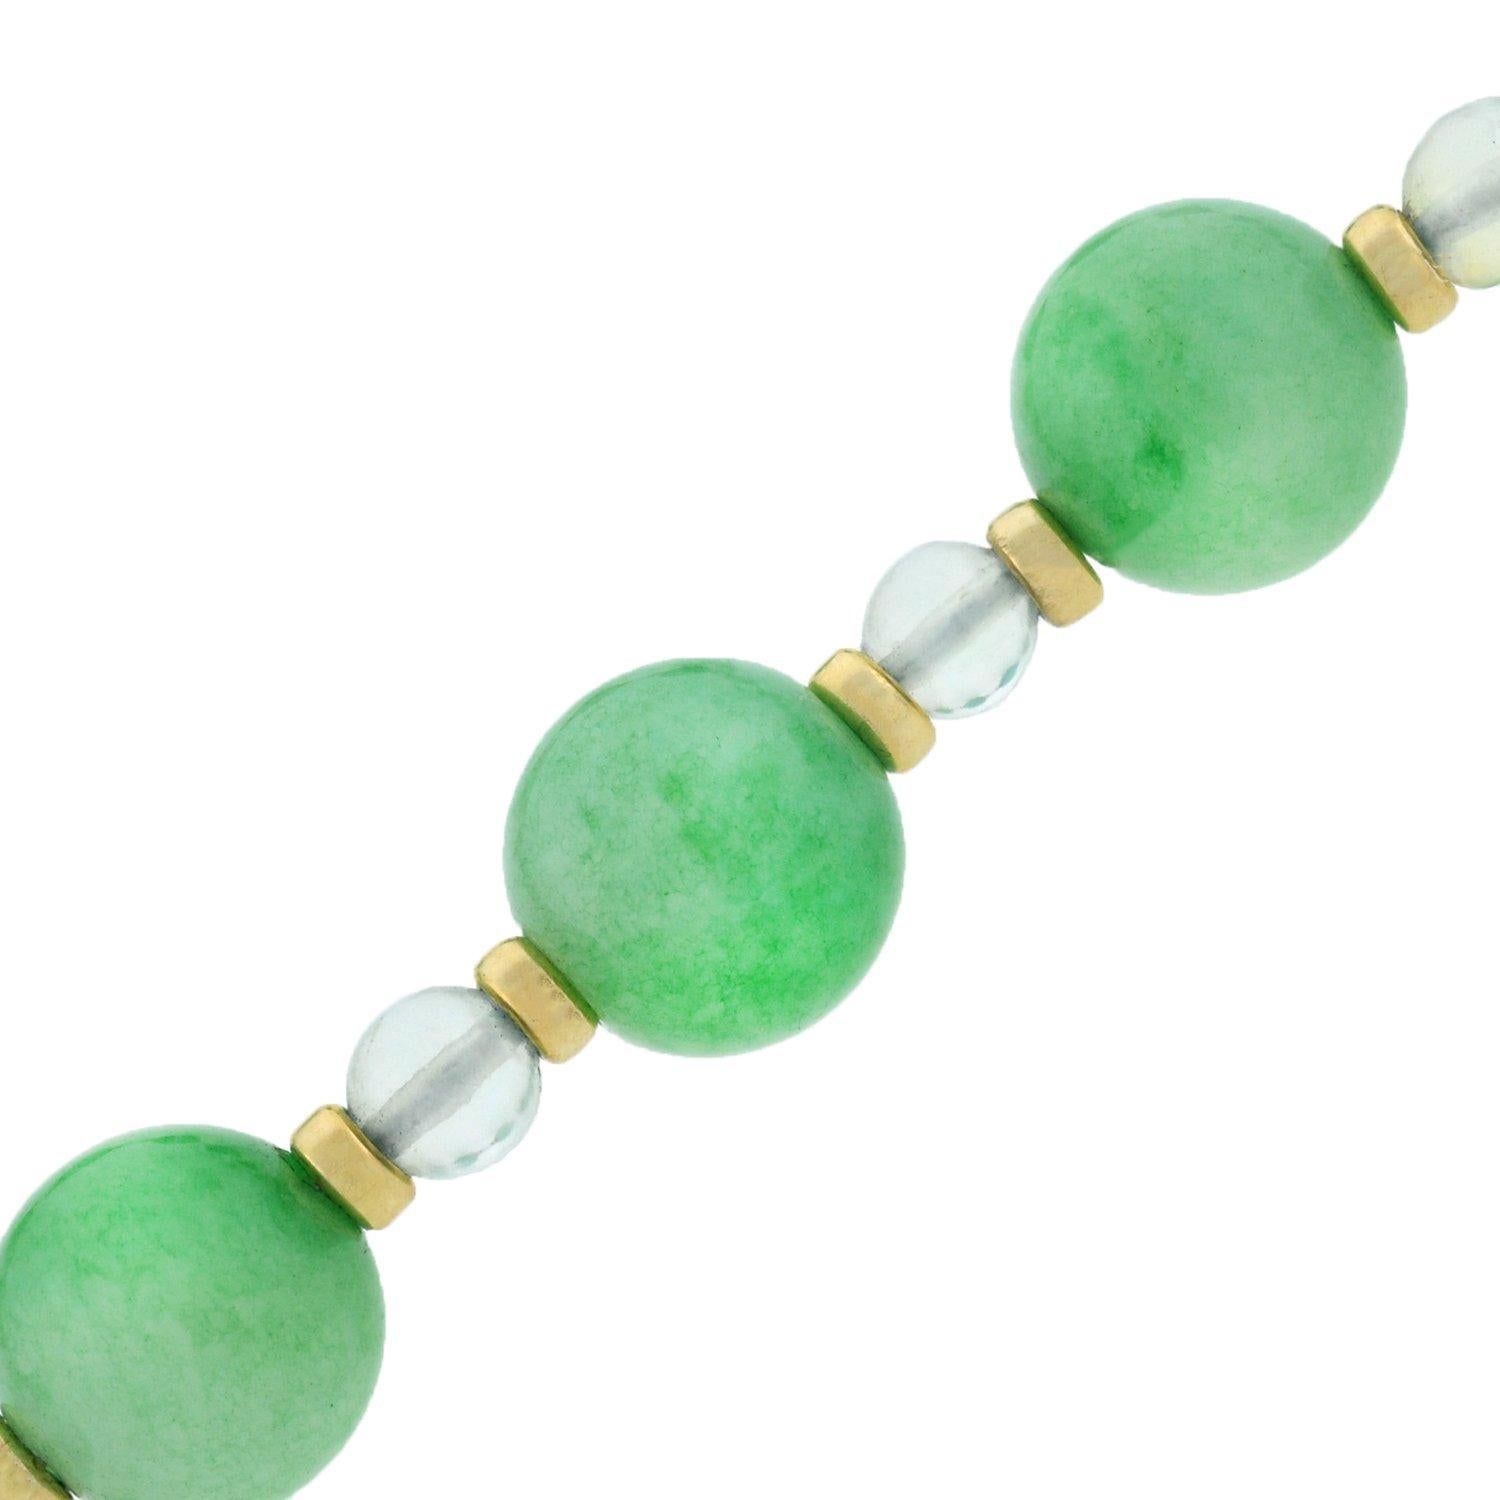 A gorgeous jade and moonstone bead necklace from the Art Deco (ca1920) era! This stunning and relatively long piece is comprised of an alternating pattern of incredible natural jade and moonstone beads. The similarly sized jade beads display